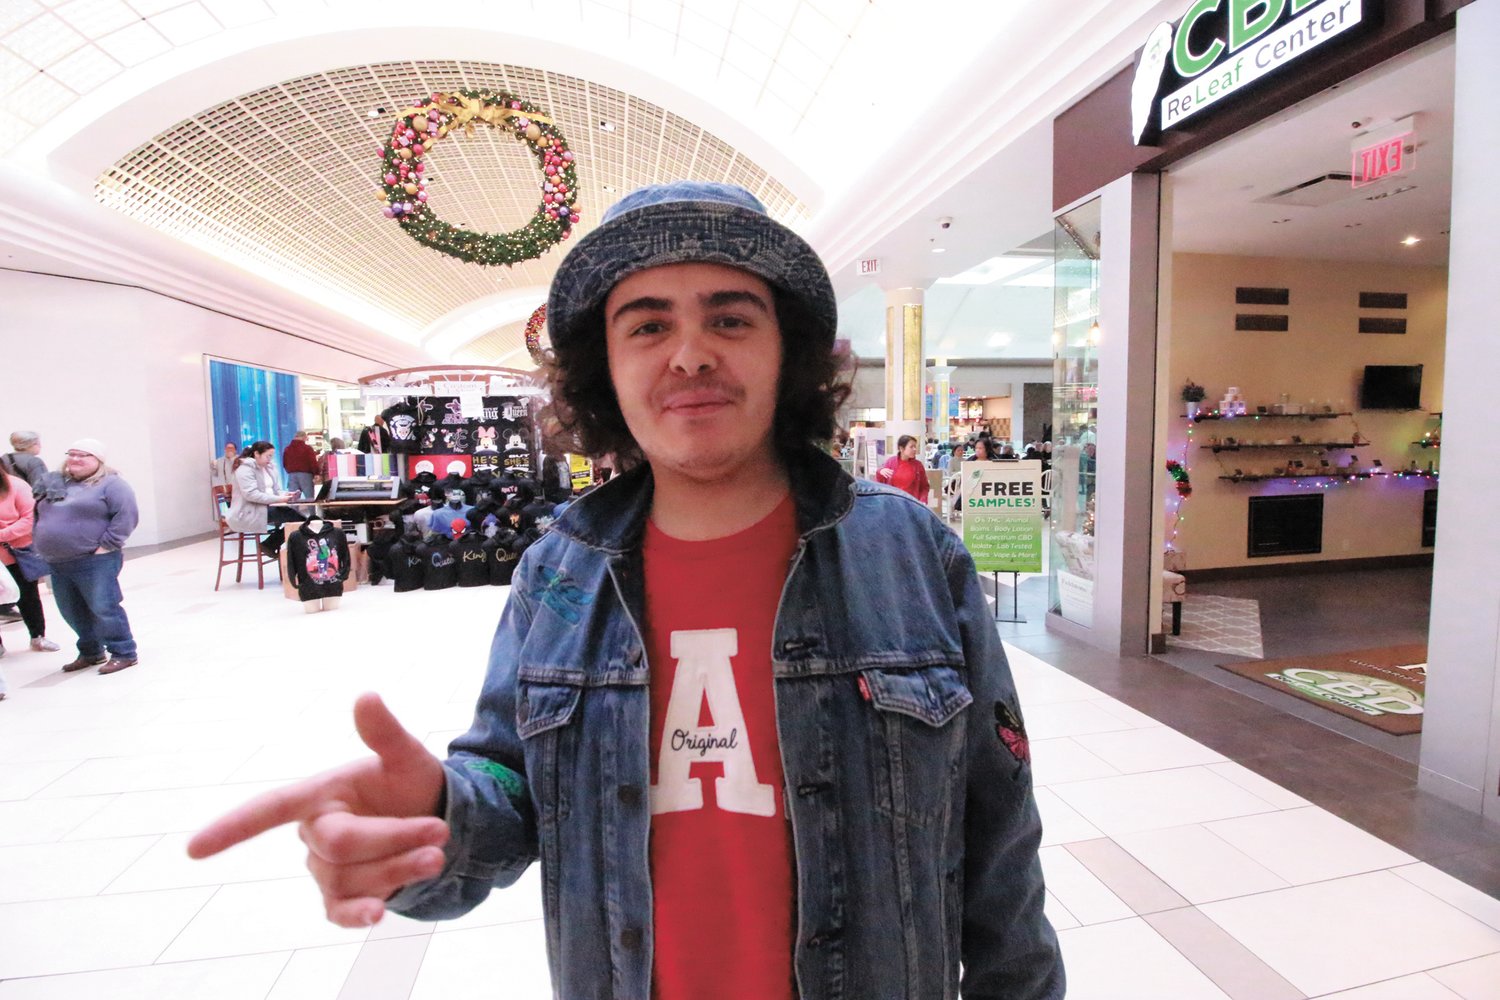 SHOPPPING FOR DEALS: Dennis Paolucci  said he visited the Warwick Mall Friday to get out and feel the Christmas spirit as well as to see if he might come up with a deal on jeans.